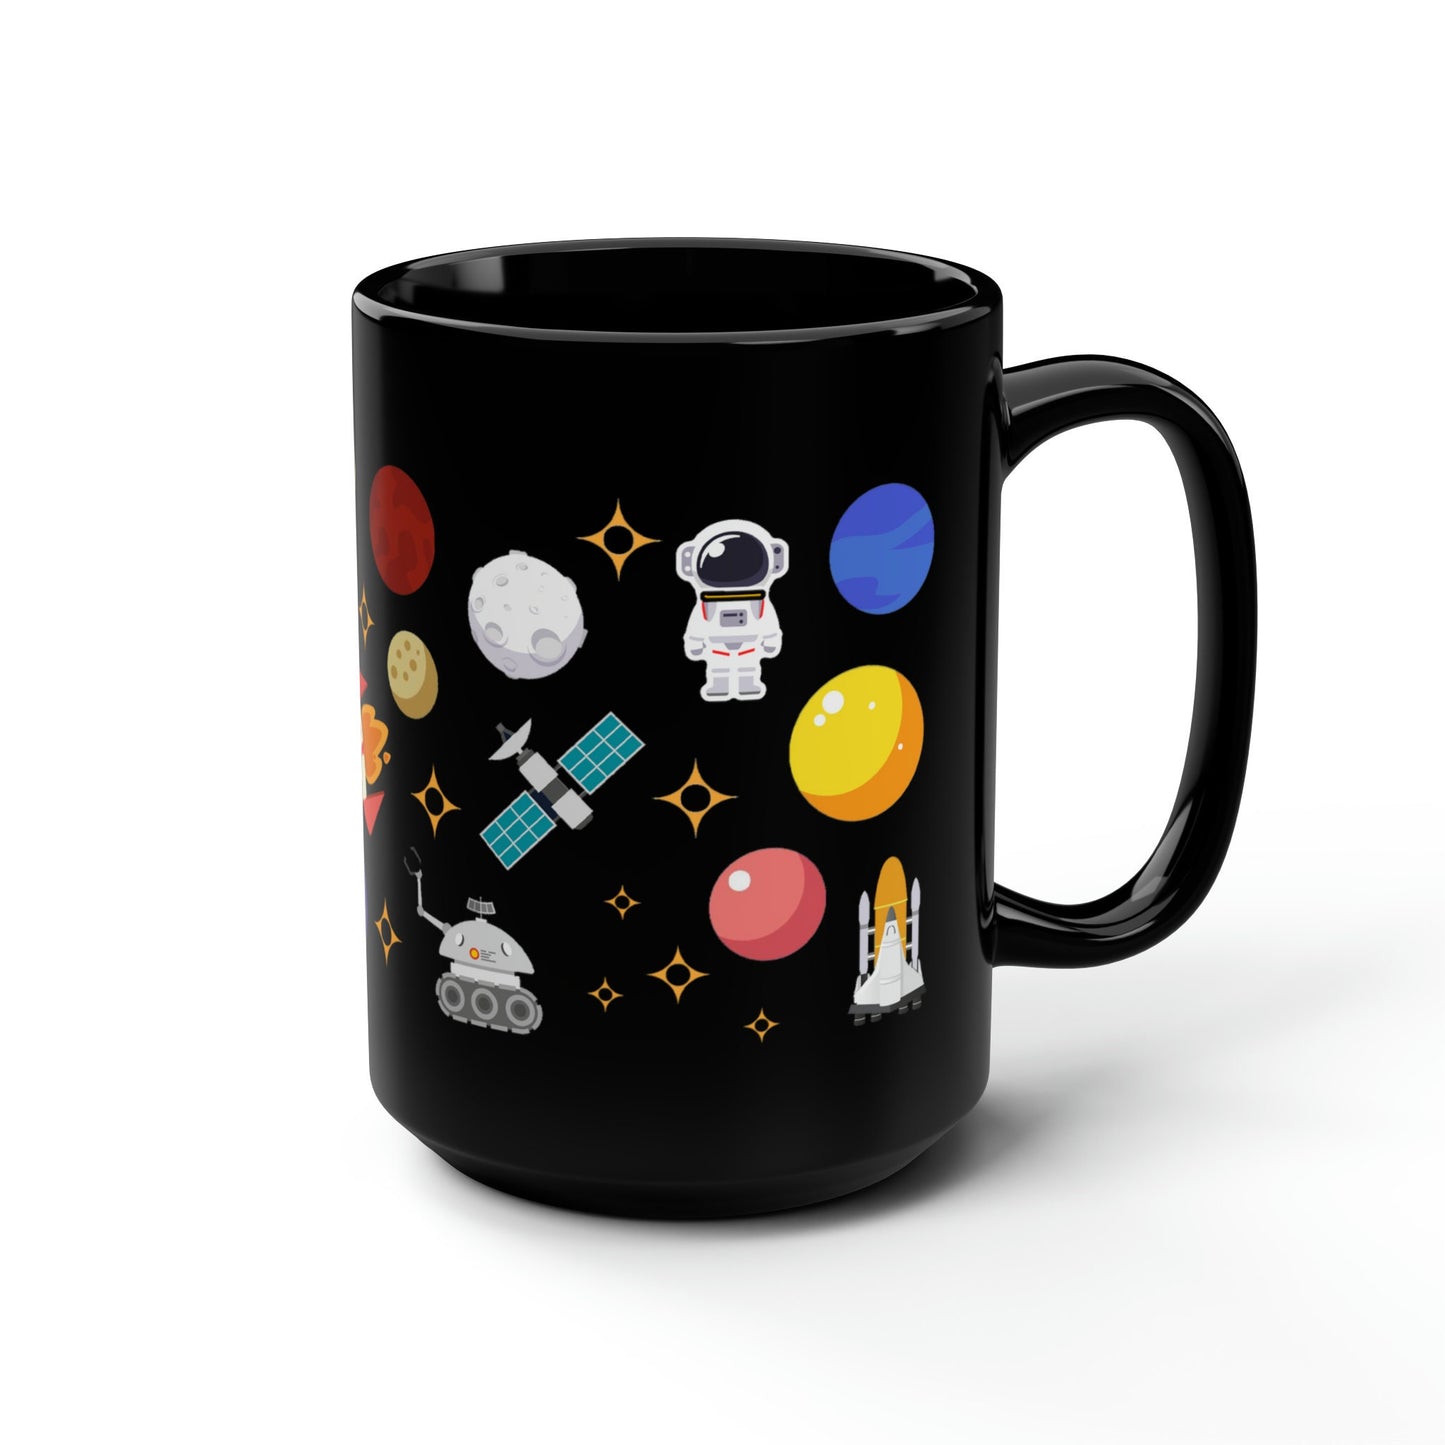 a black coffee mug with space and planets on it